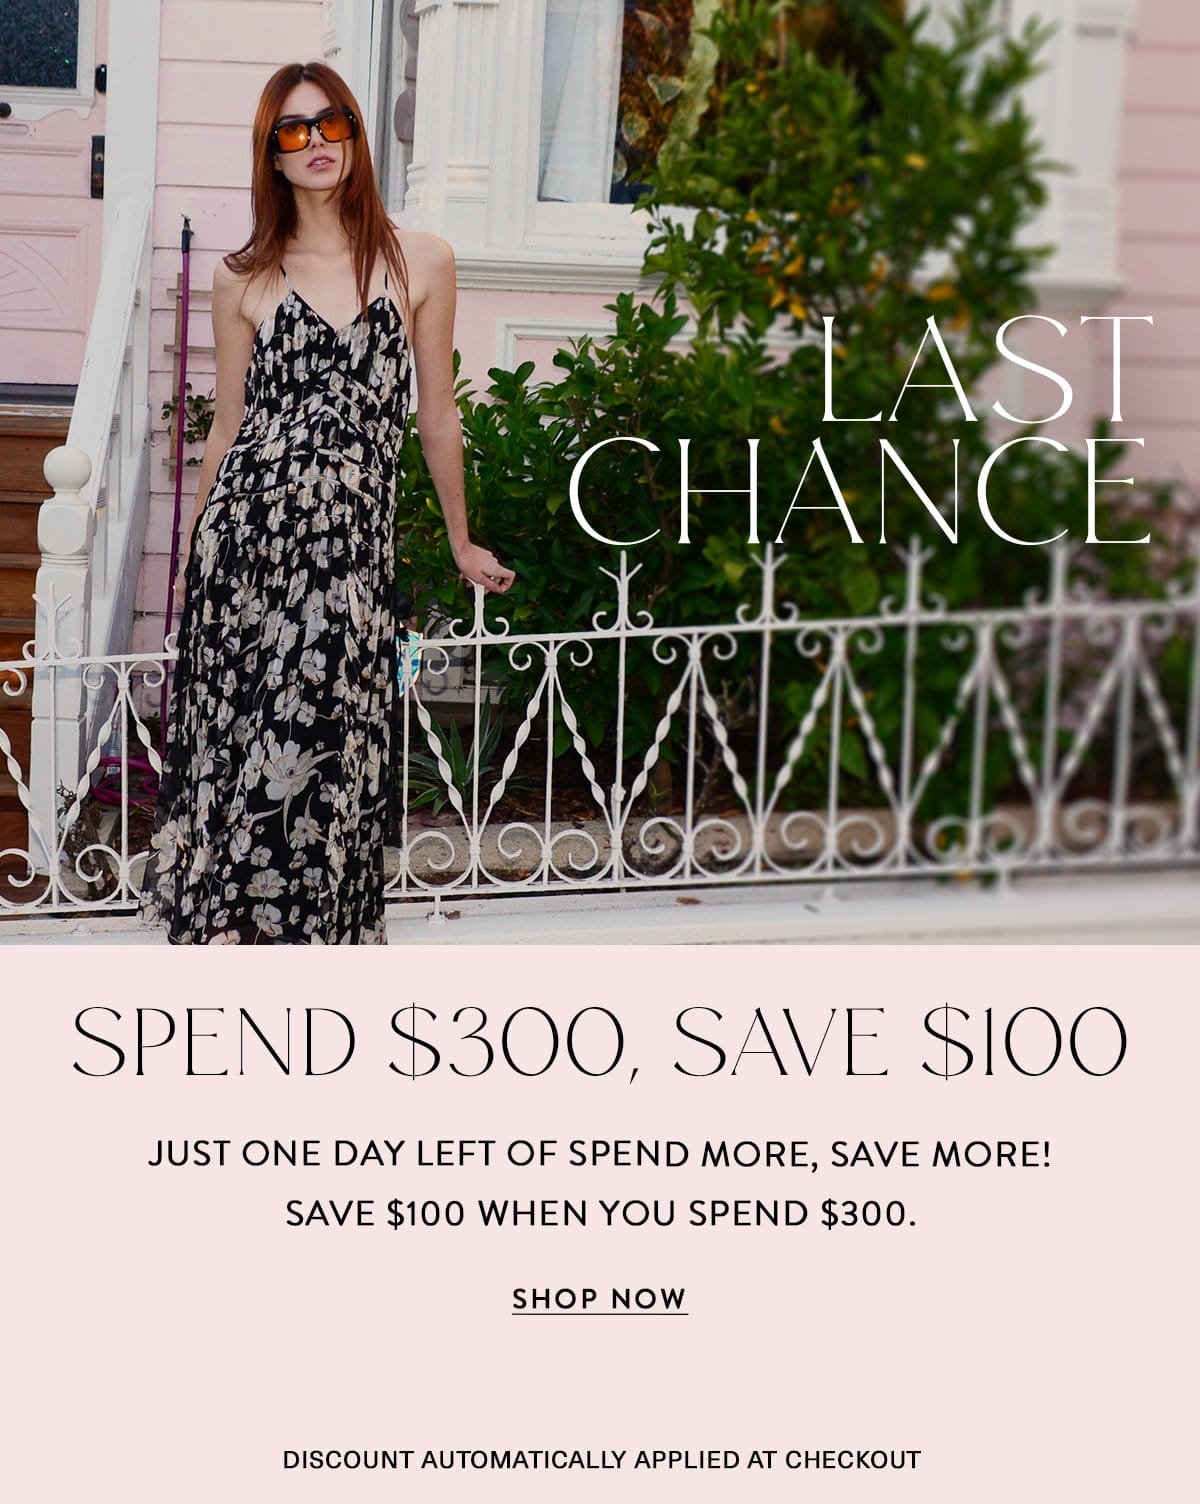 LAST CHANCE SPEND \\$300, SAVE \\$100 Just one day left of spend more, save more! Save \\$100 when you spend \\$300. Discount Automatically Applied at Checkout SHOP NOW